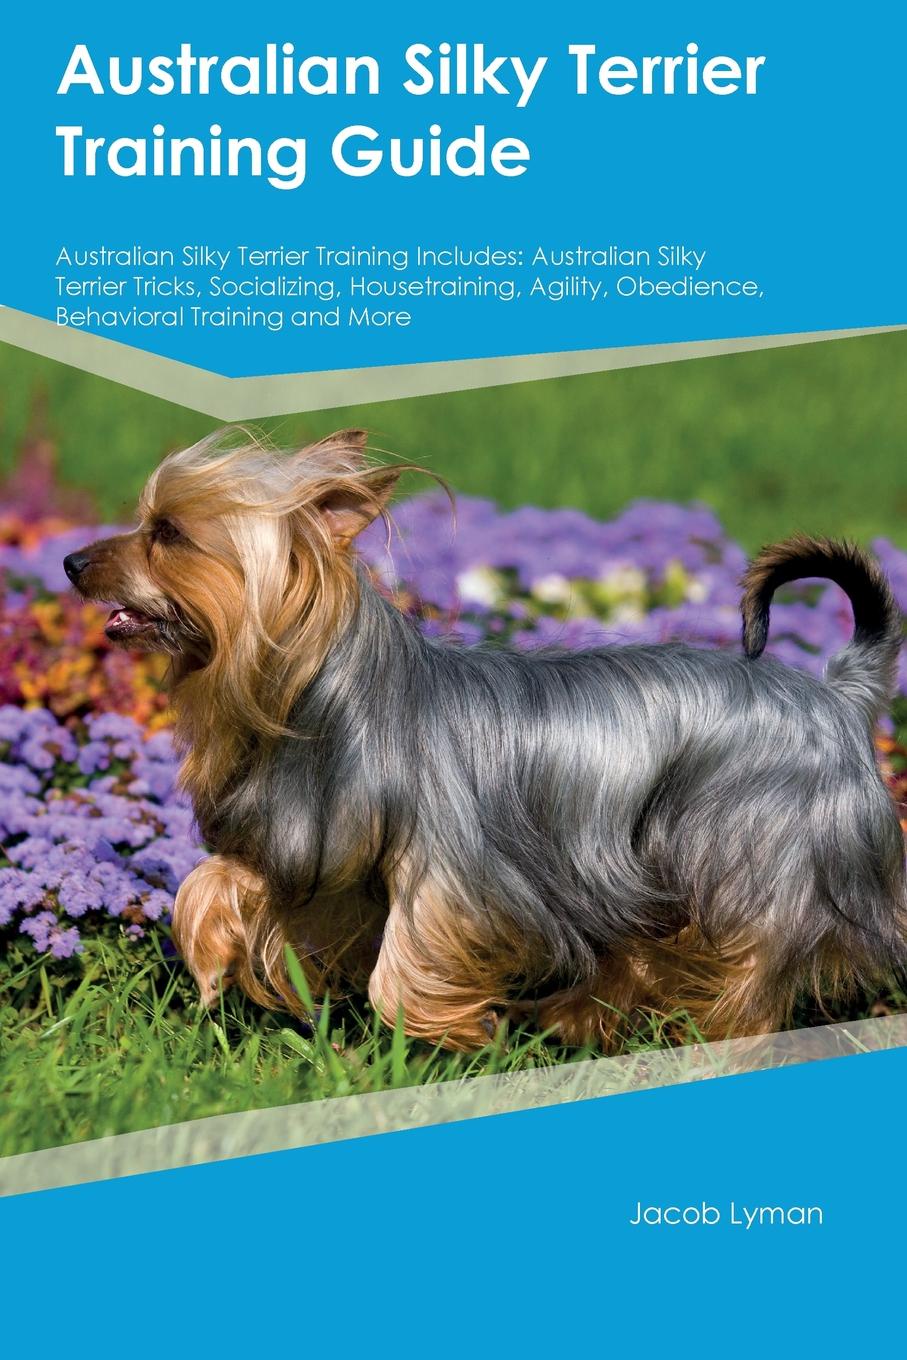 Australian Silky Terrier Training Guide Australian Silky Terrier Training Includes. Australian Silky Terrier Tricks, Socializing, Housetraining, Agility, Obedience, Behavioral Training and More